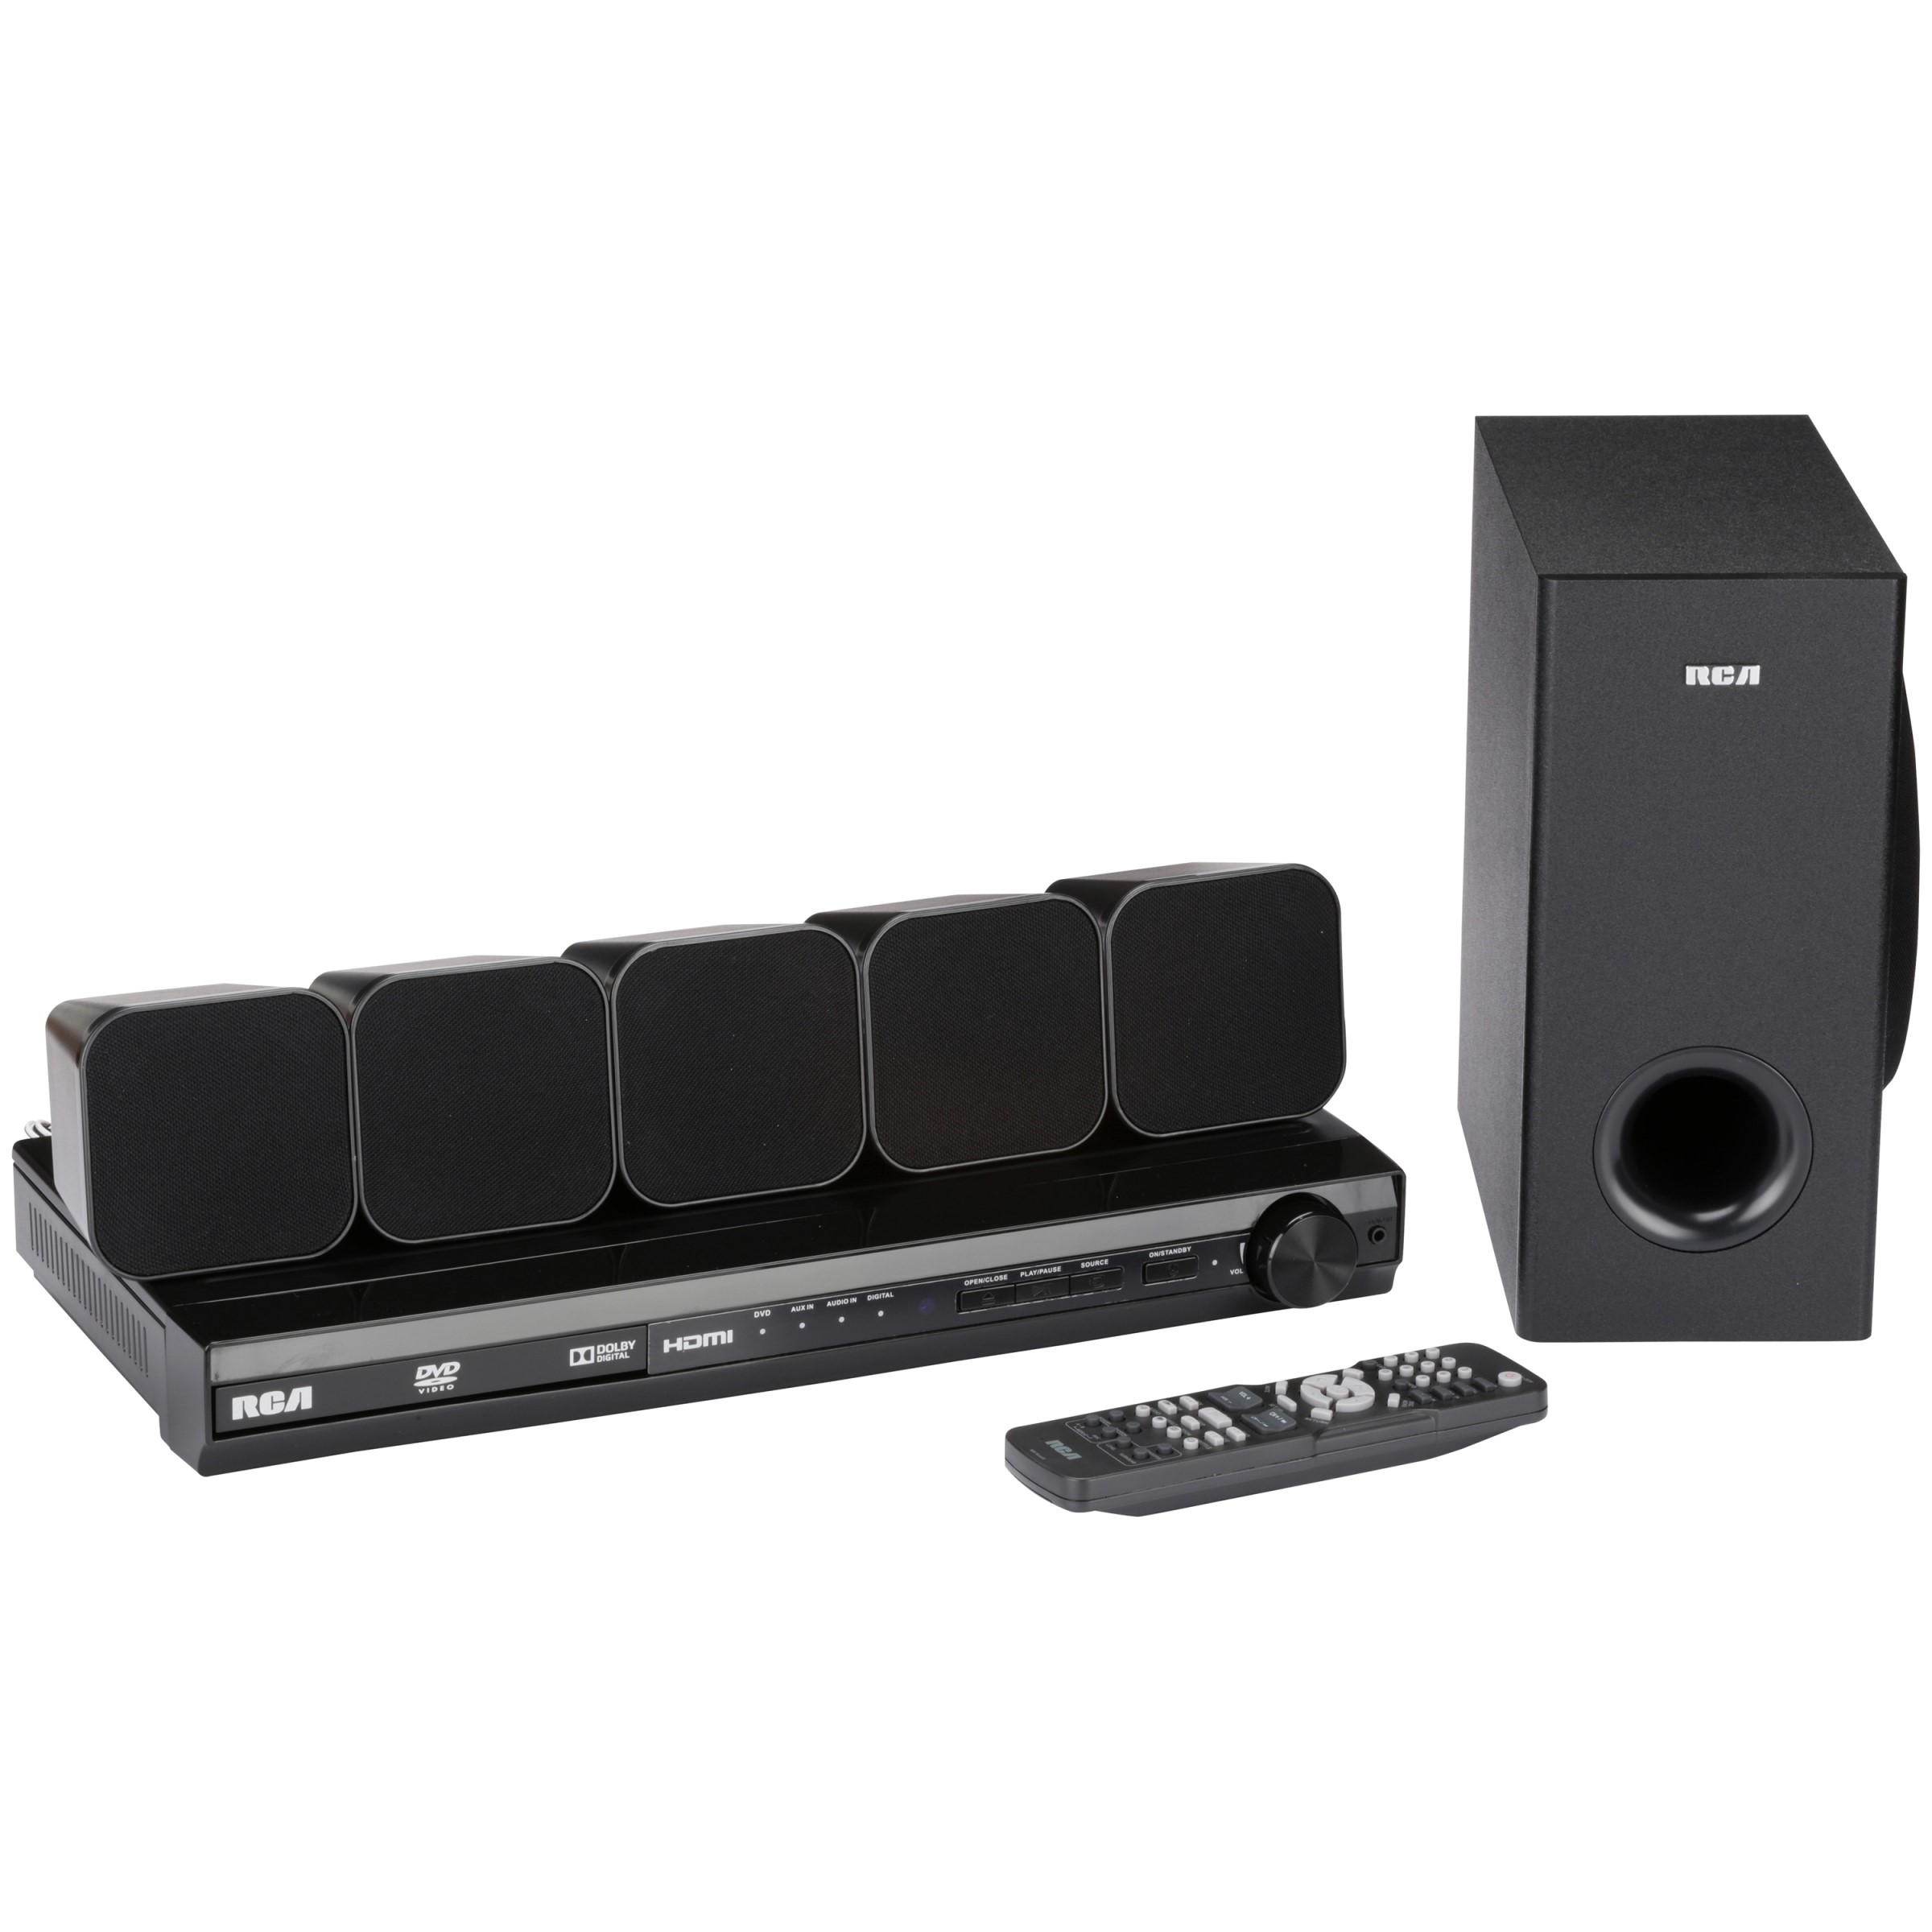 RCA DVD Home Theater System with HDMI 1080p Output 8 pc Box - image 1 of 10